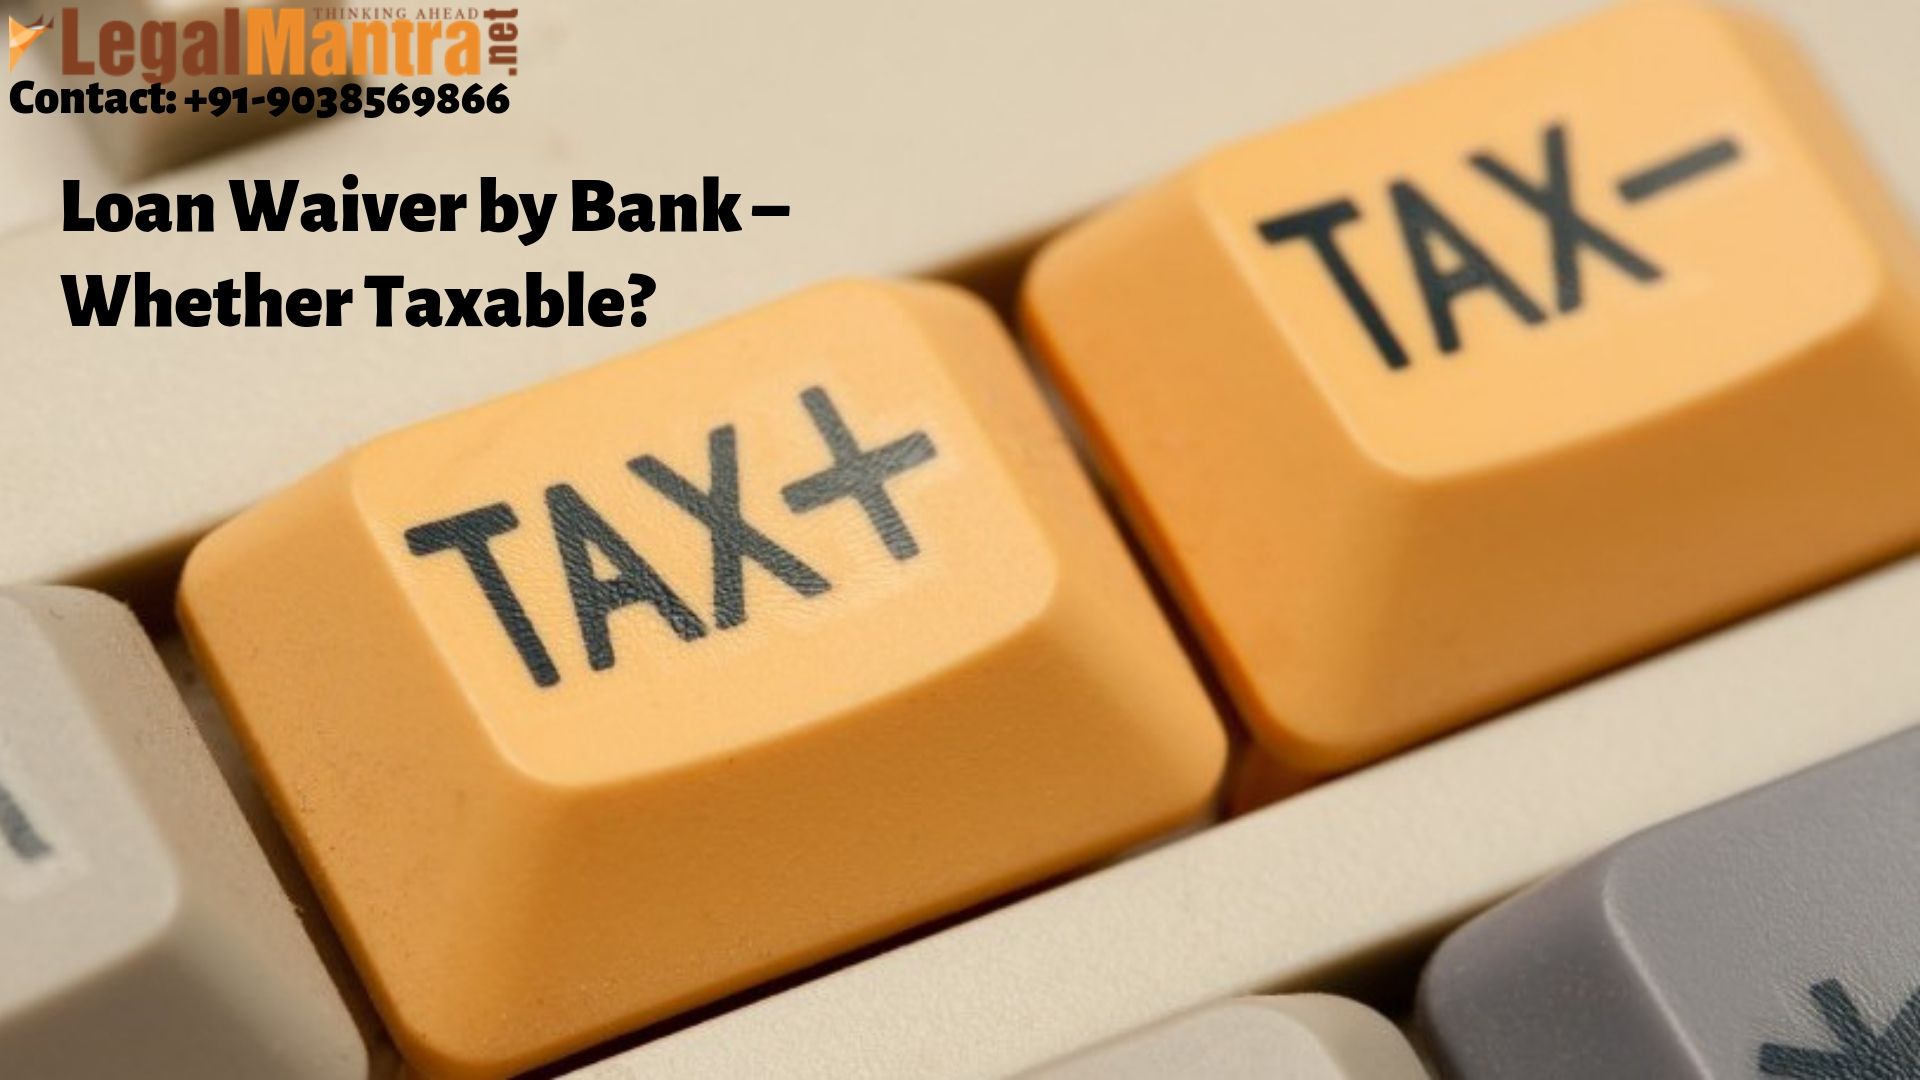 Loan Waiver by Bank – Whether Taxable?